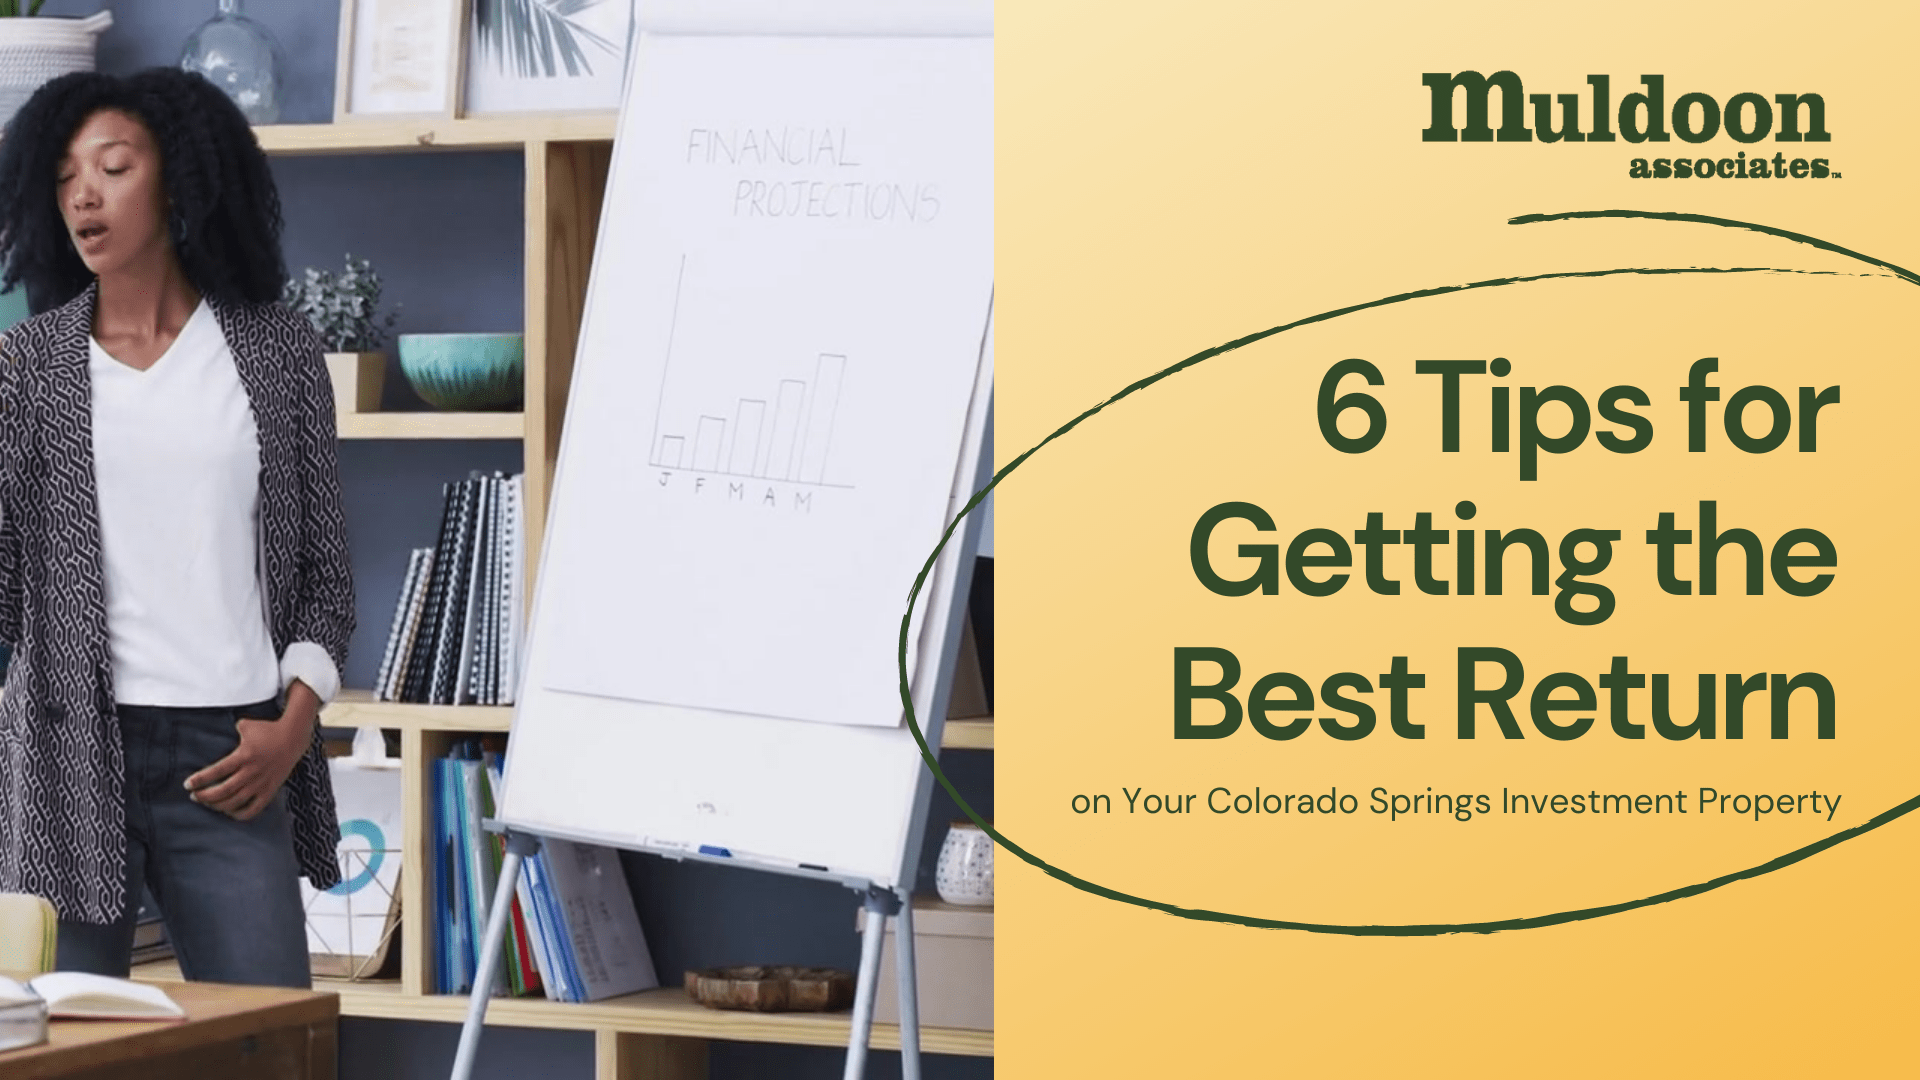 6 Tips for Getting the Best Return on Your Colorado Springs Investment Property